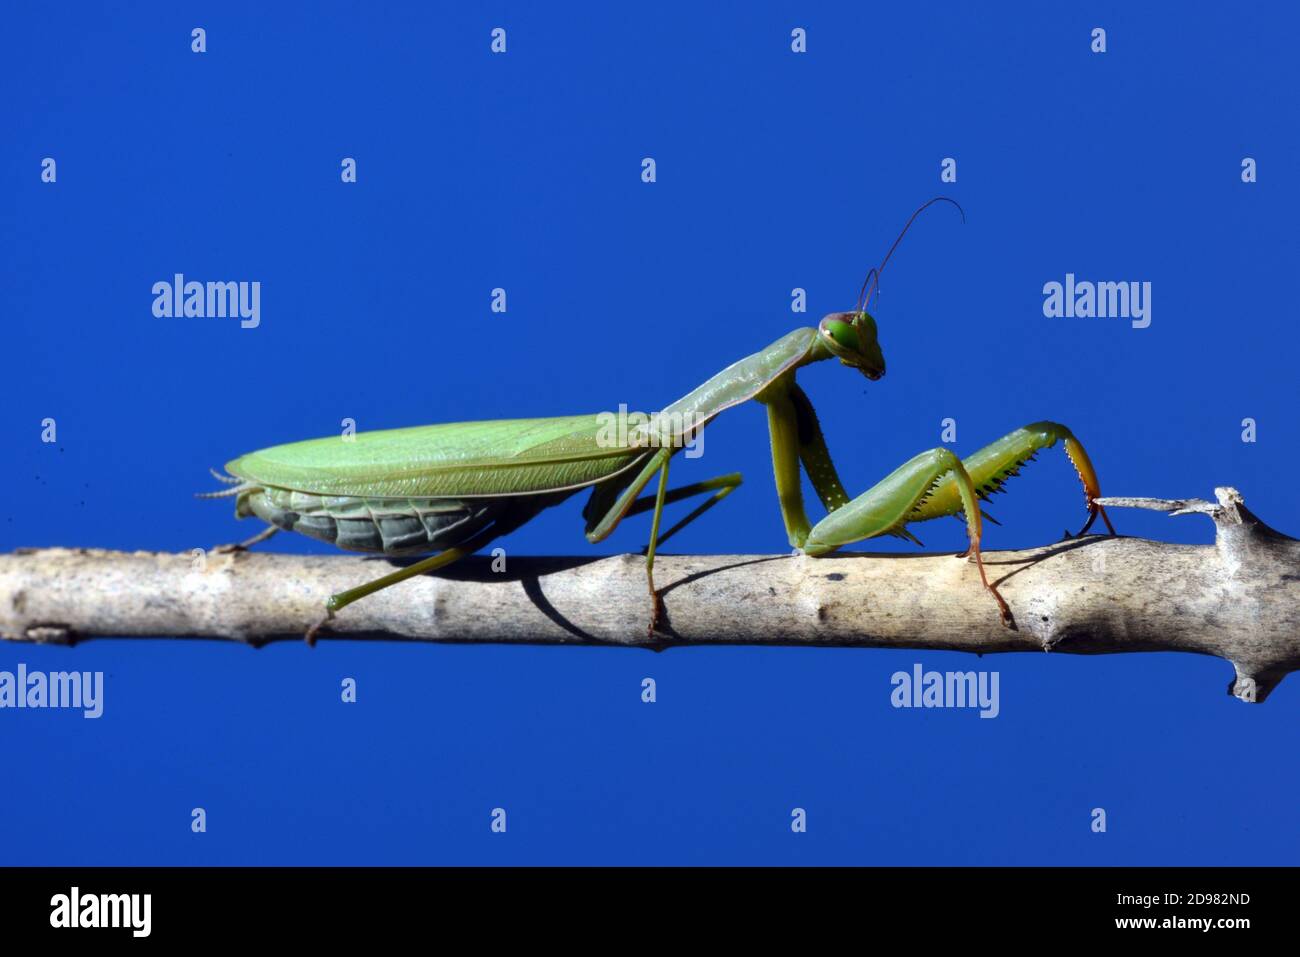 Green Female Praying Mantis, Mantis religiosa, Posed on Twig or Branch Against Blue Sky Stock Photo